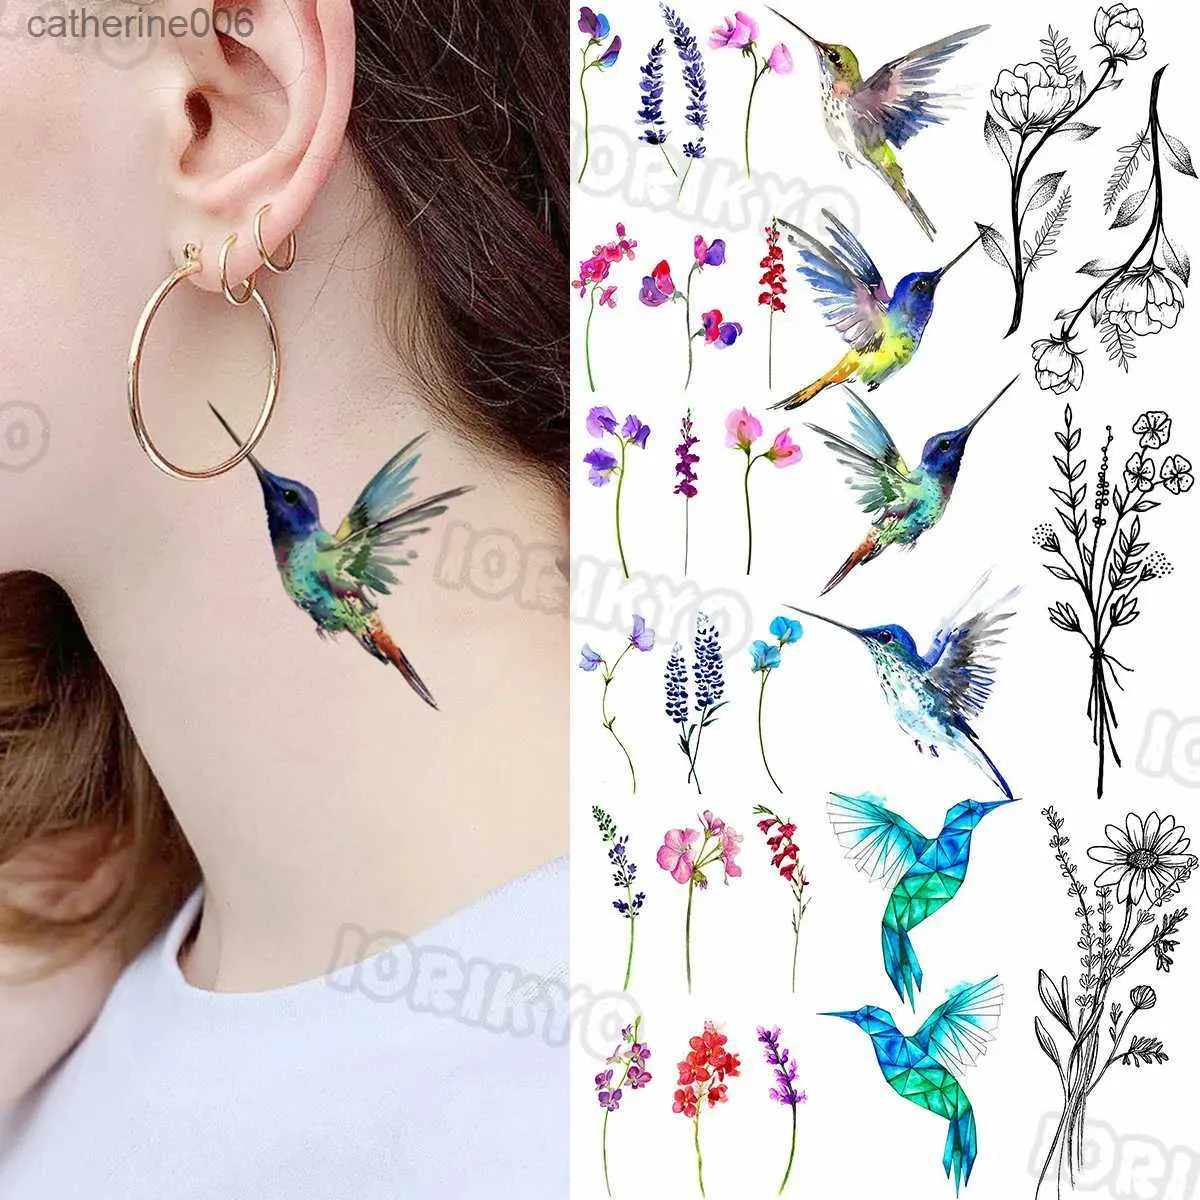 Colorful Hummingbird And Lavender Plum Blossom Temporary Bird Tattoo For  Women And Girls Perfect For Weddings And Neck Tattooing From Catherine006,  $1.77